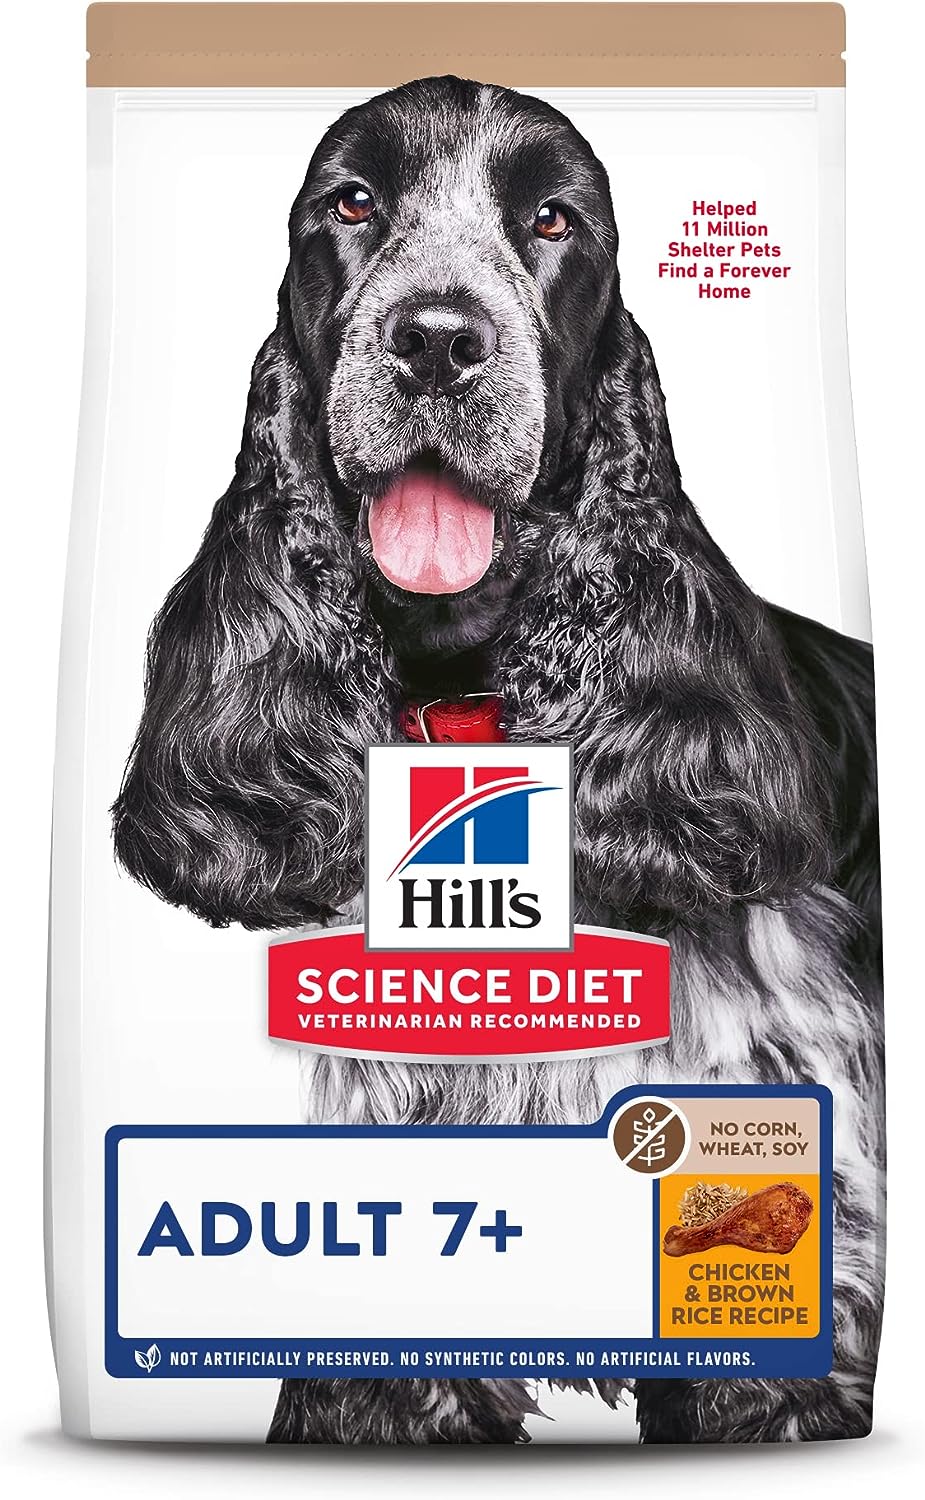 Hill’s Science Diet Adult 7+ Chicken & Brown Rice Recipe No Corn, Wheat, Soy Dry Dog Food – Gallery Image 1